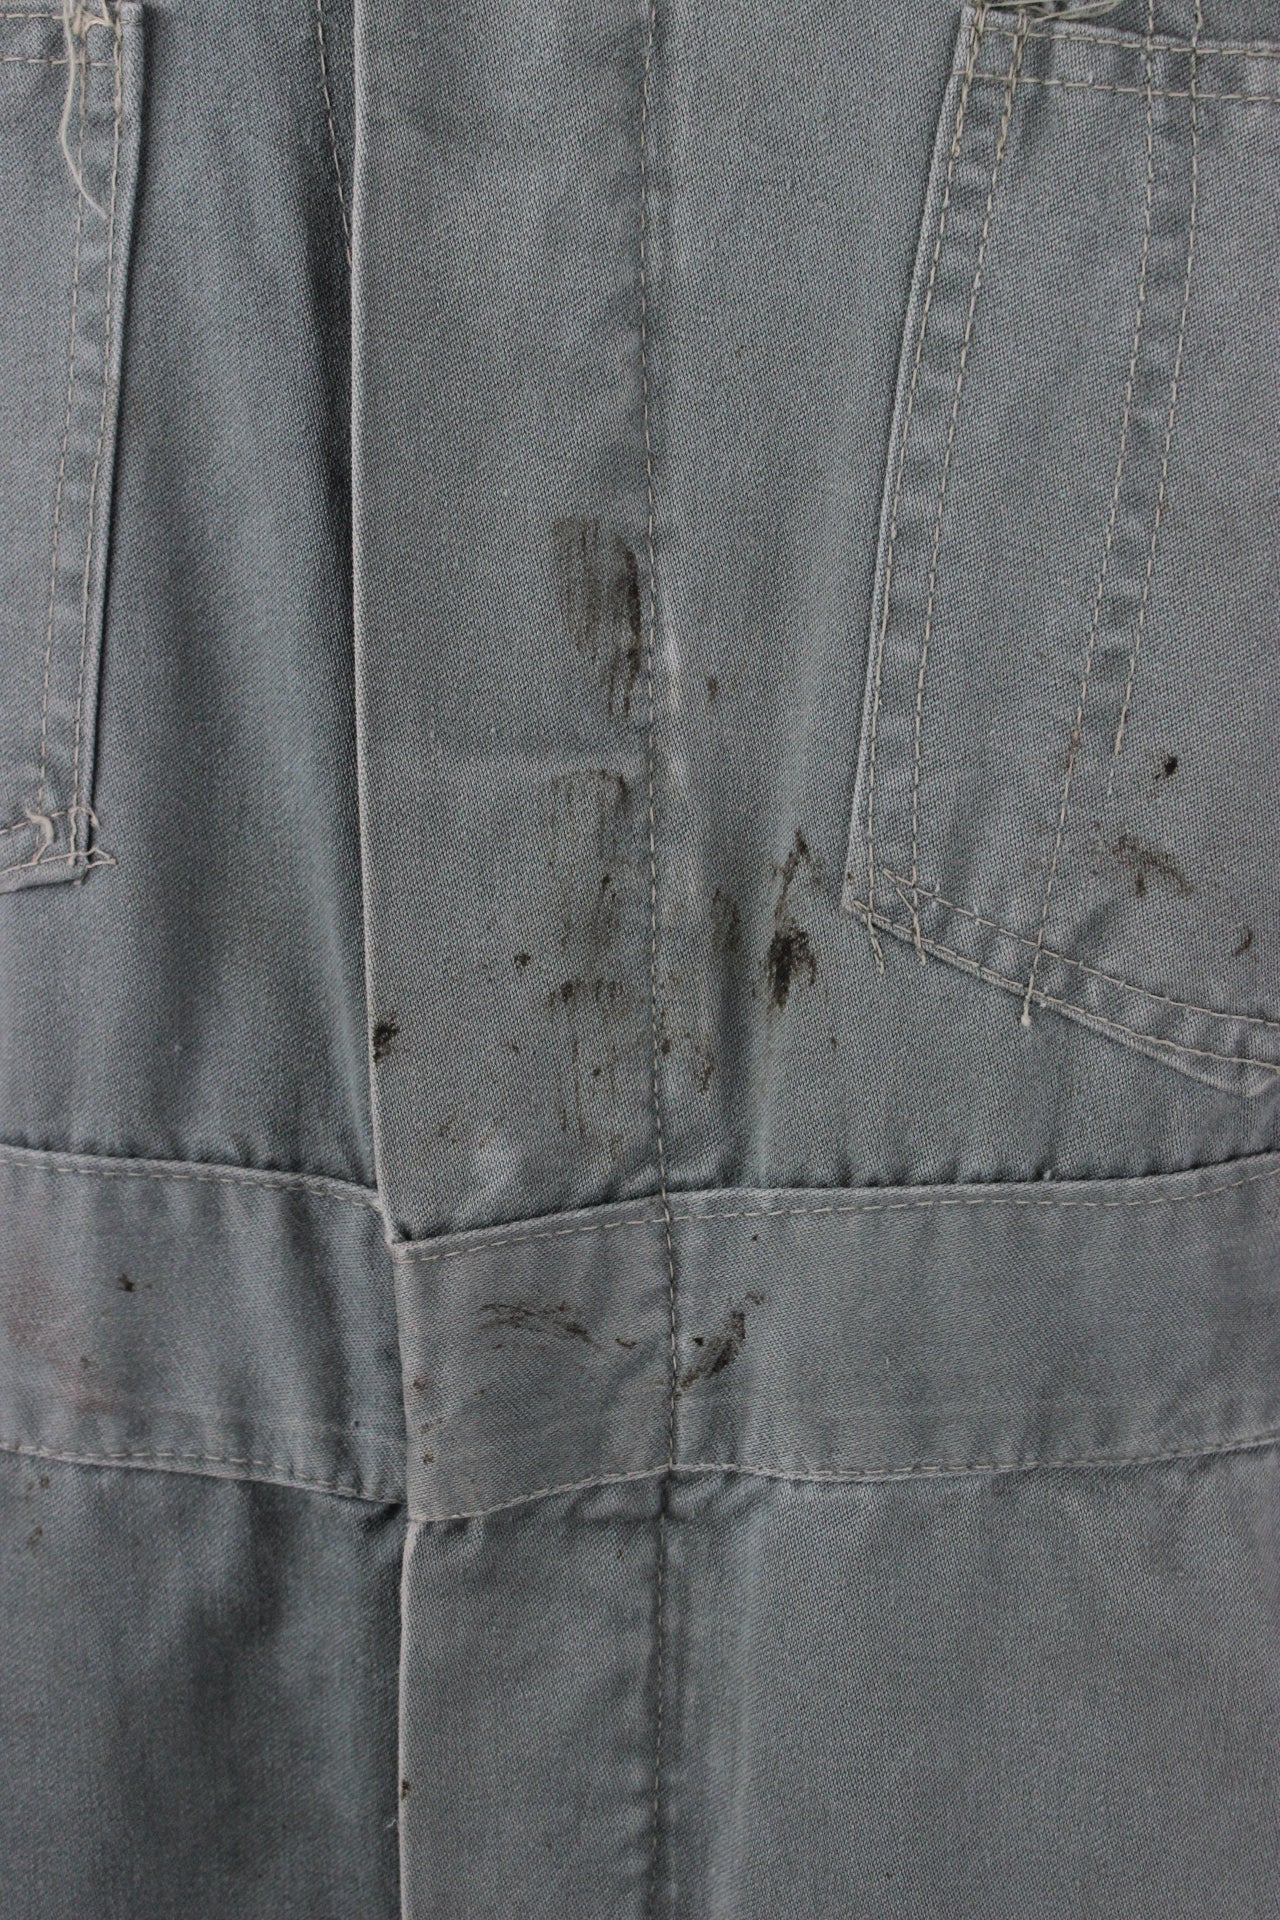 detail views of stains at placket of coveralls.